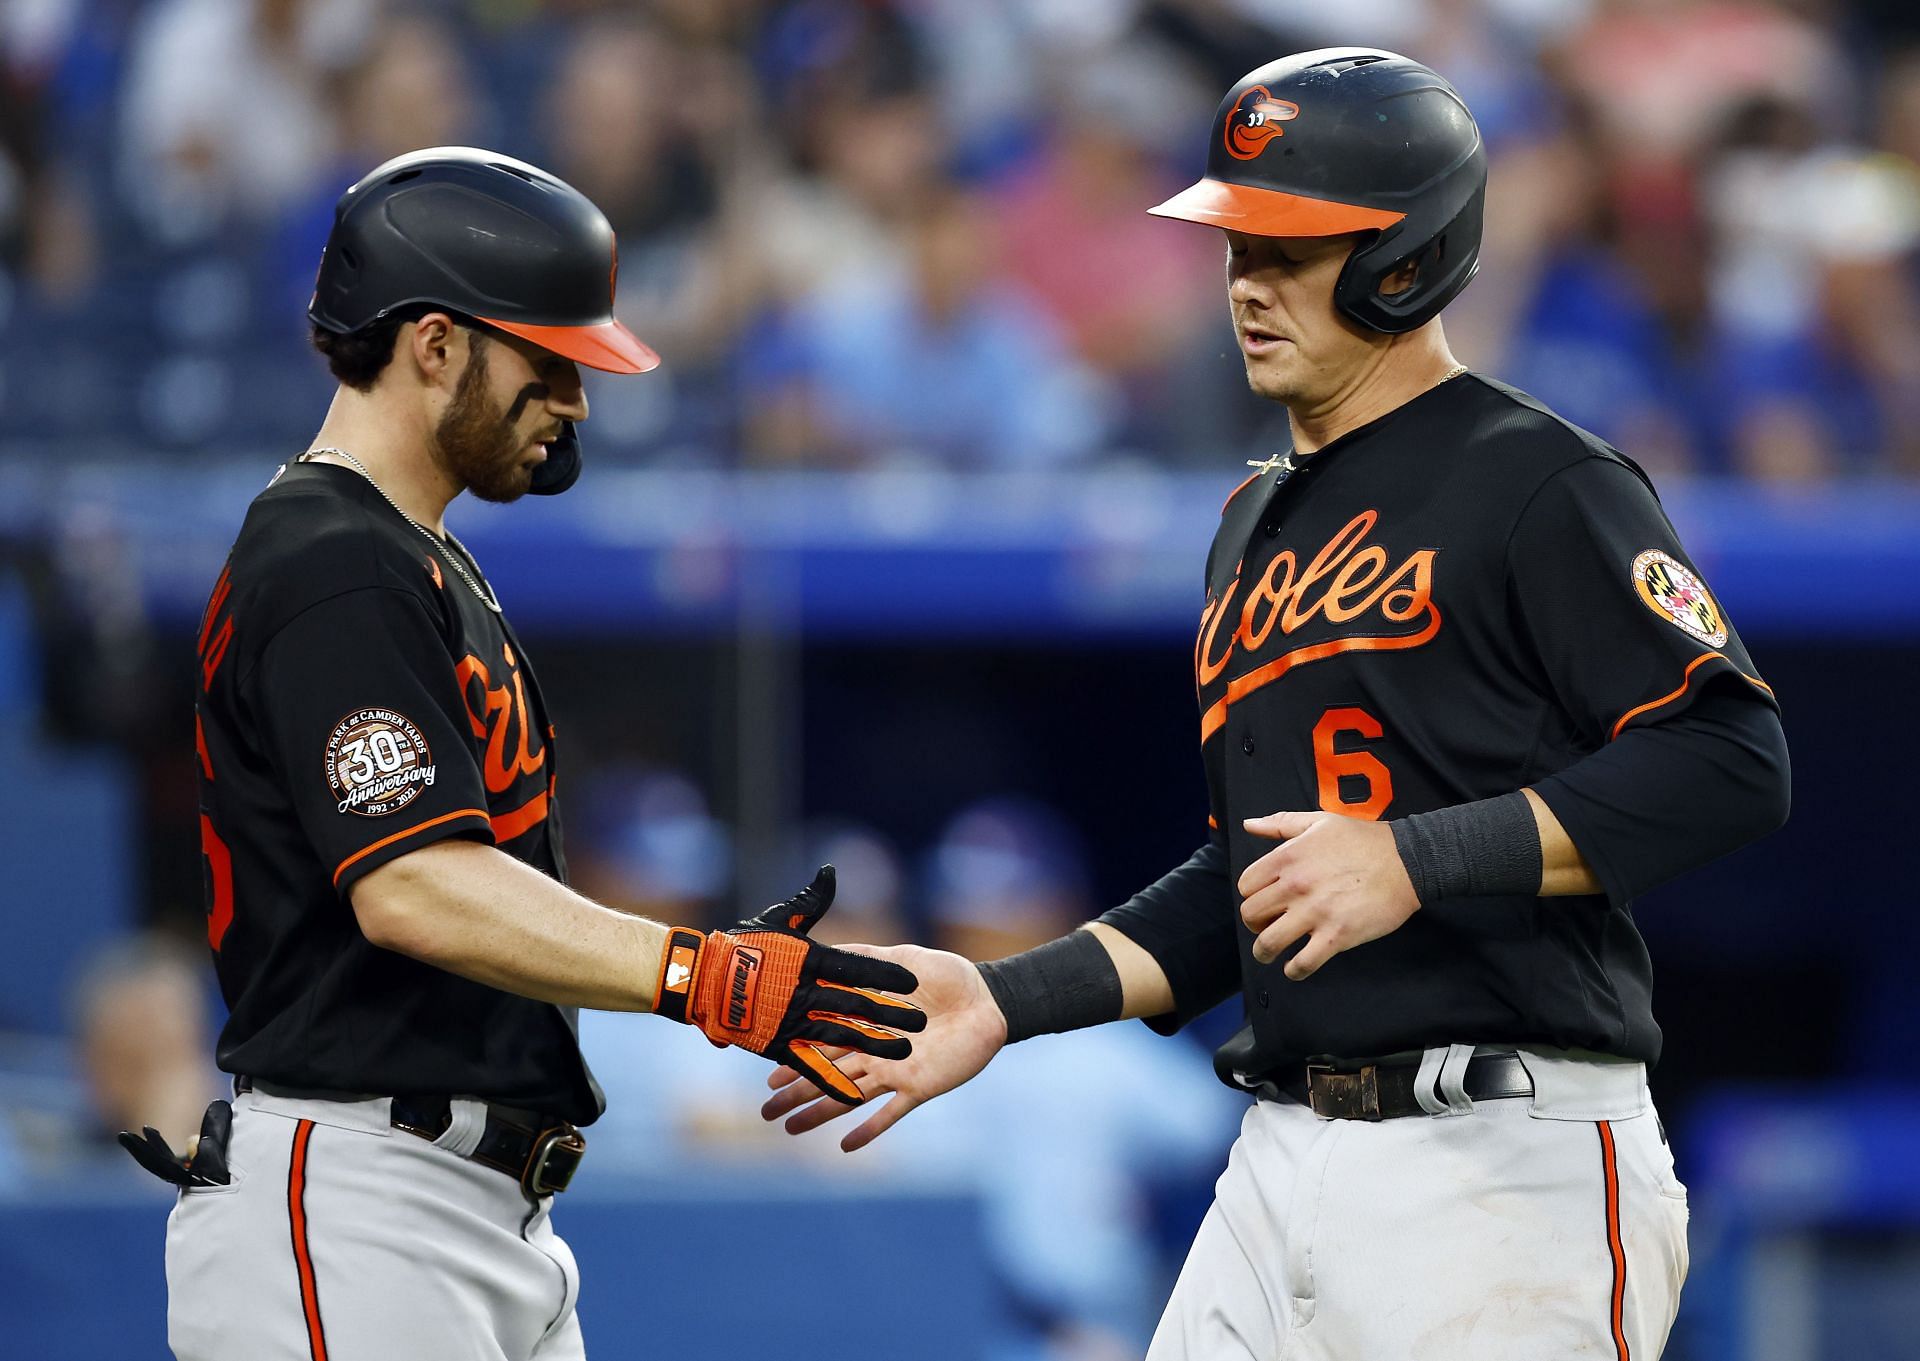 The Orioles and Blue Jays match up in Baltimore on Monday.